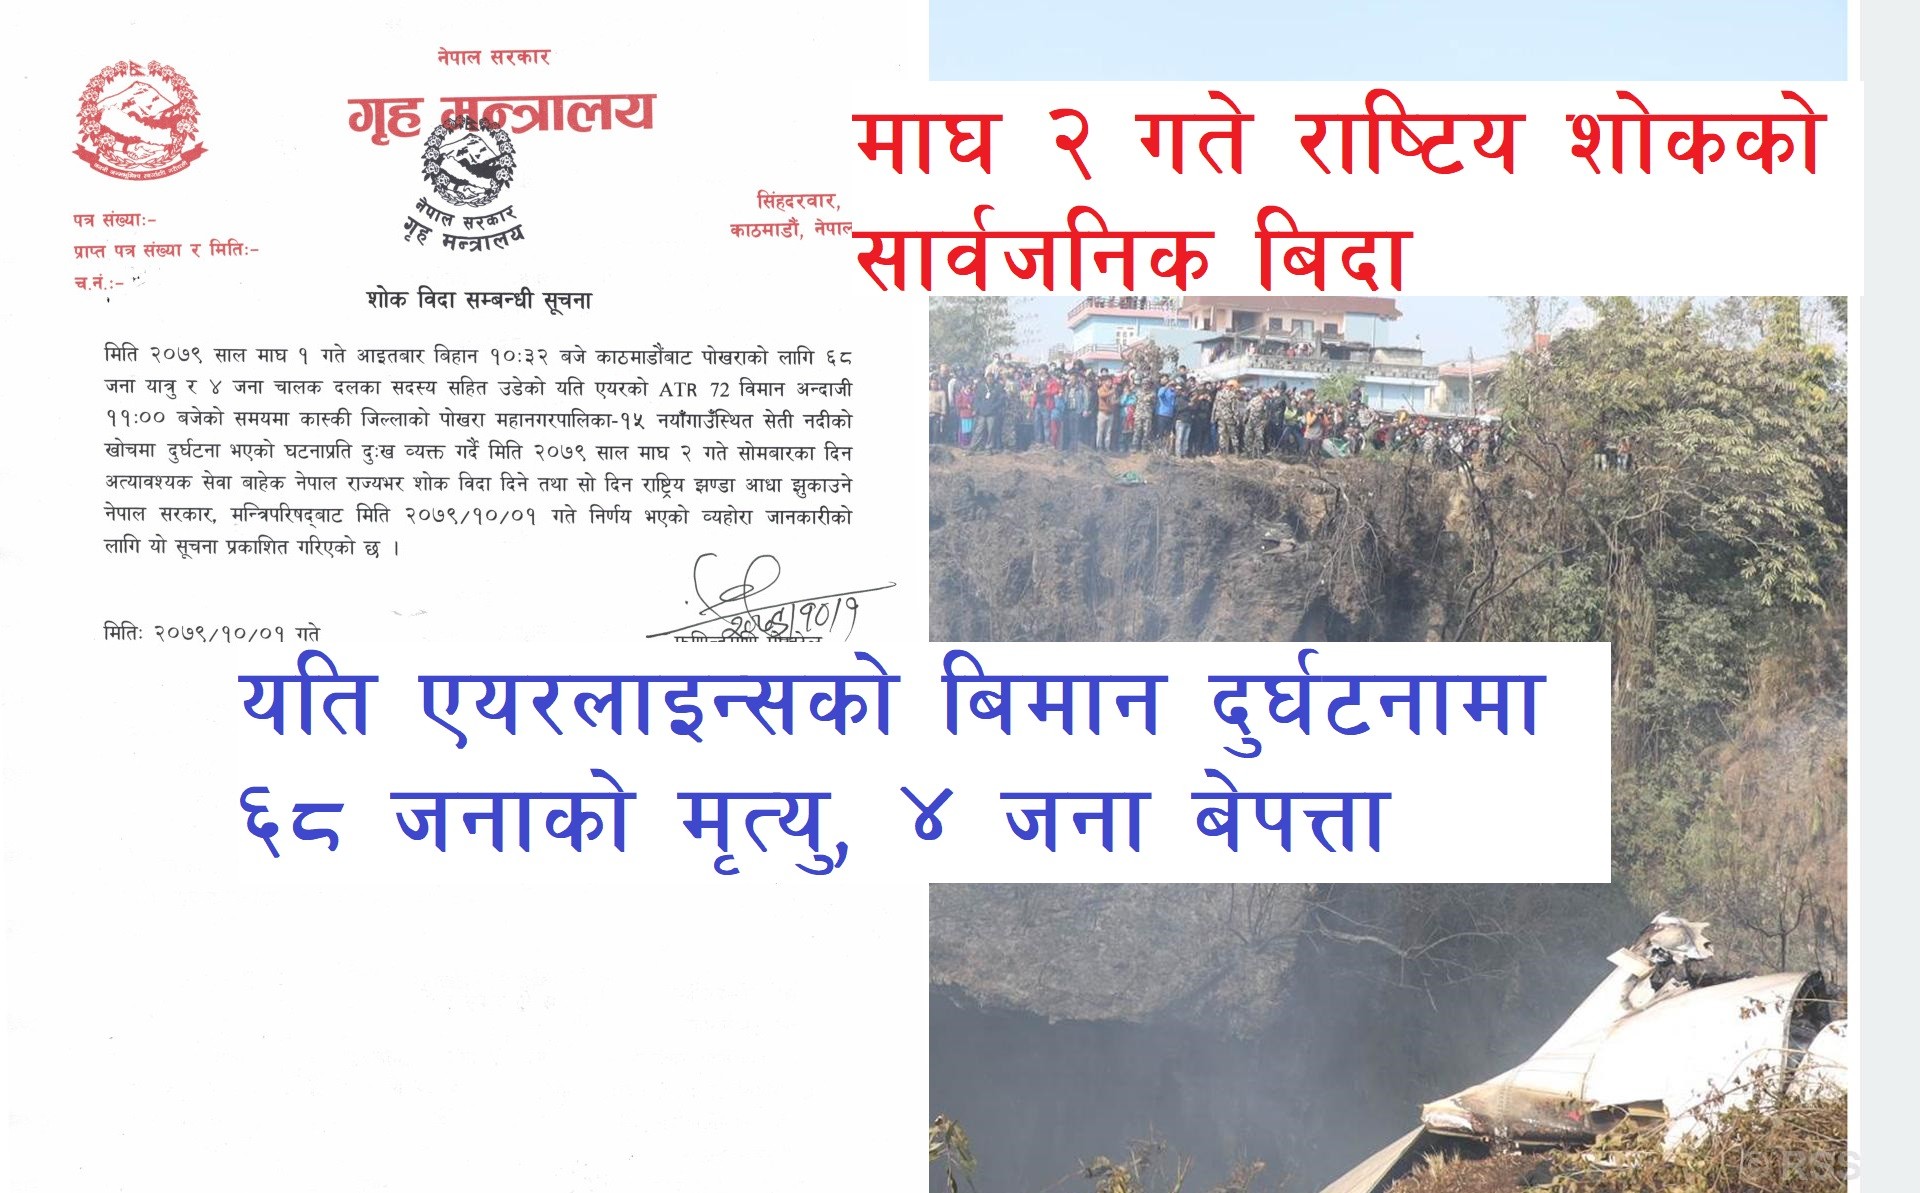 National mourning and public holiday on 2 magh : 68 people have died in the Pokhara plane crash